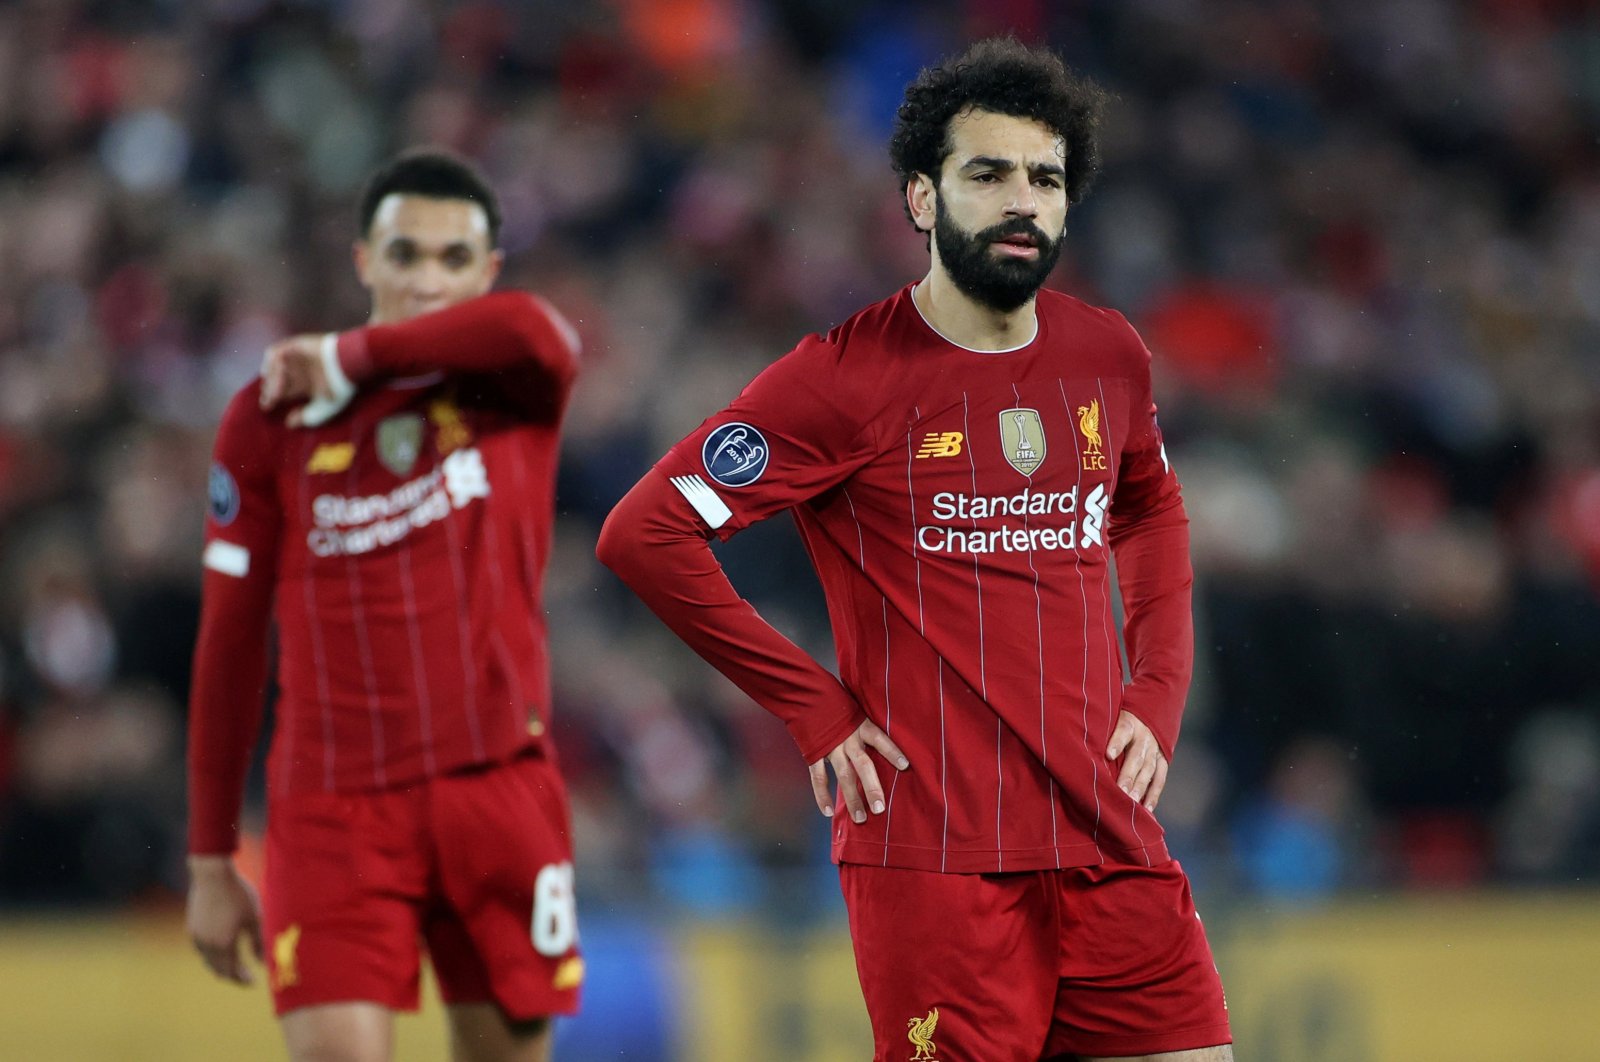  Liverpool's Mohamed Salah reacts during a Champions League match Against Atletico Madrid, Liverpool, Britain, March 11, 2020. (Reuters Photo)